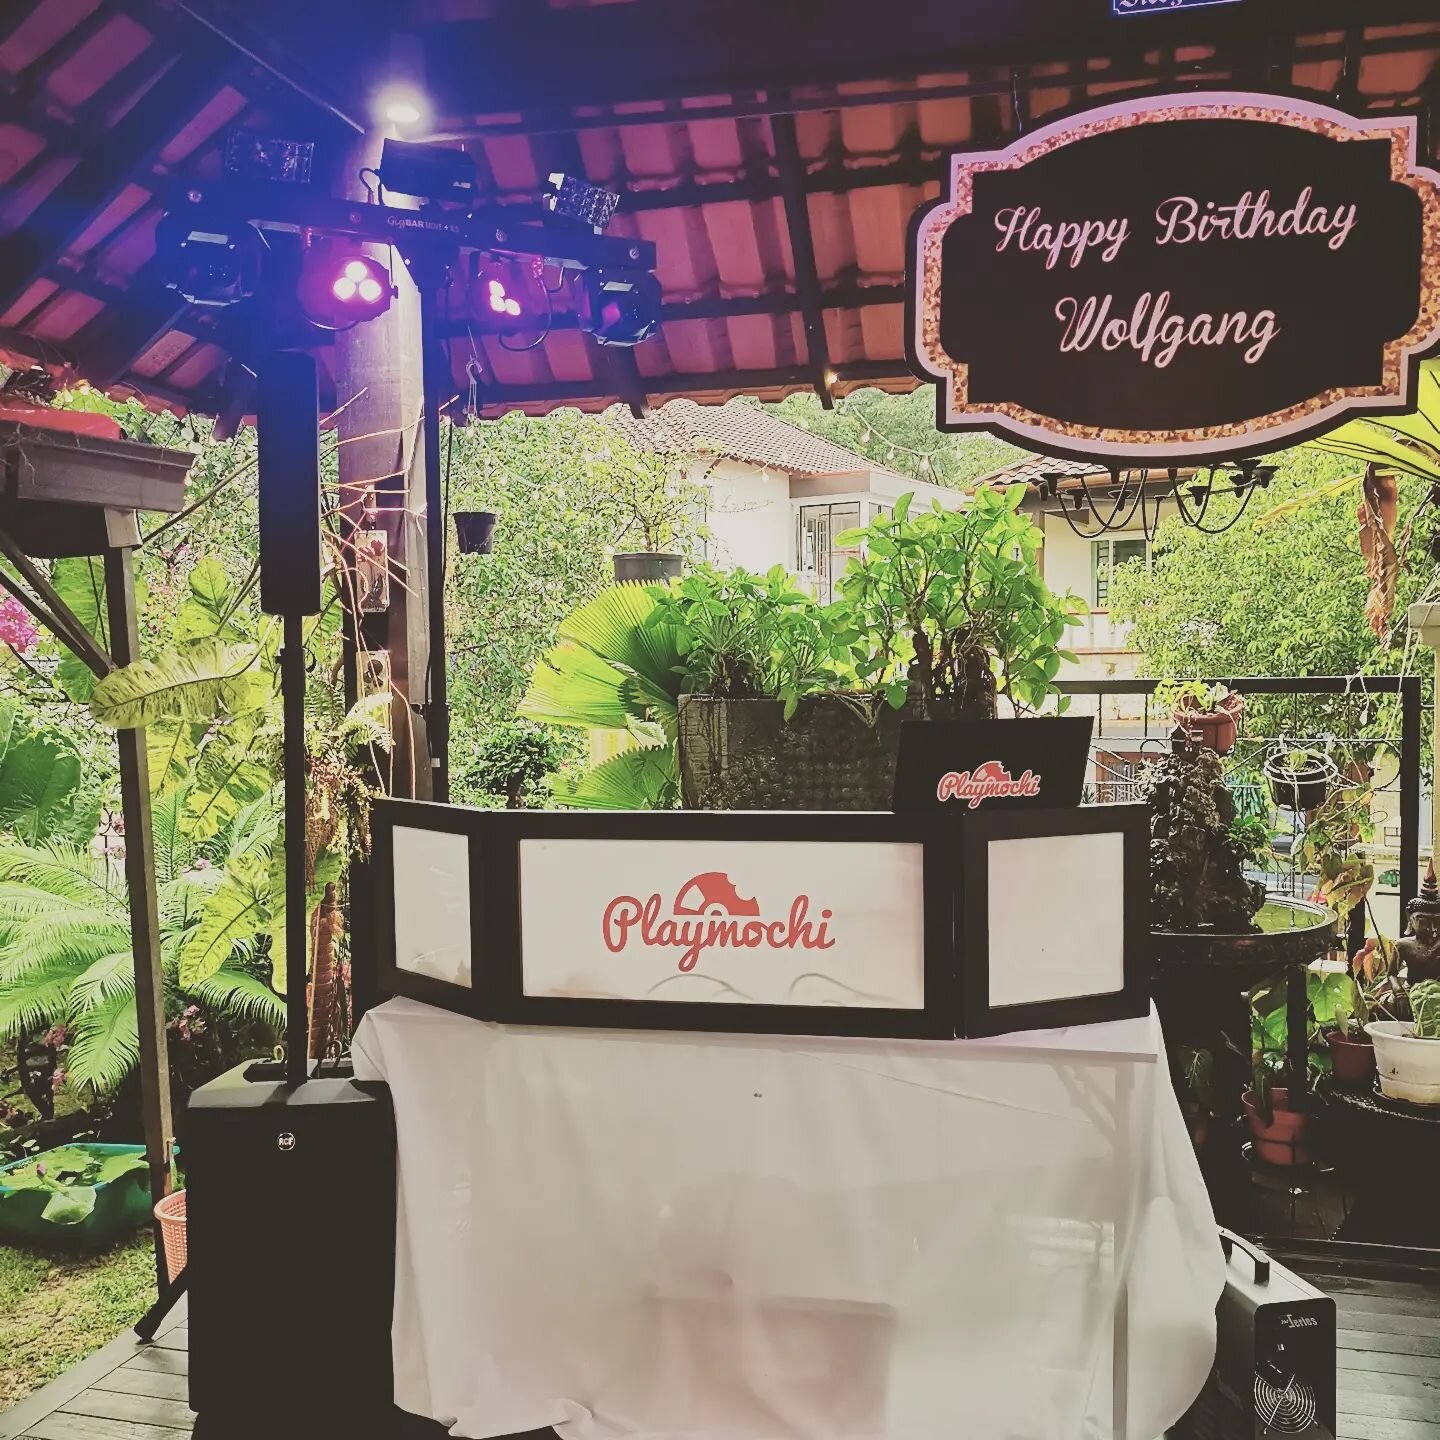 Smashing a retirement party tonight! 60/70s theme, powered by my new RCF J8 and Gigbar Move ILS.

Easy setup although rain threw a bit of a wrench. Hoping I do well with music I'm not too familiar with!

#playmochi #mobiledj #party #dj #houseparty #r